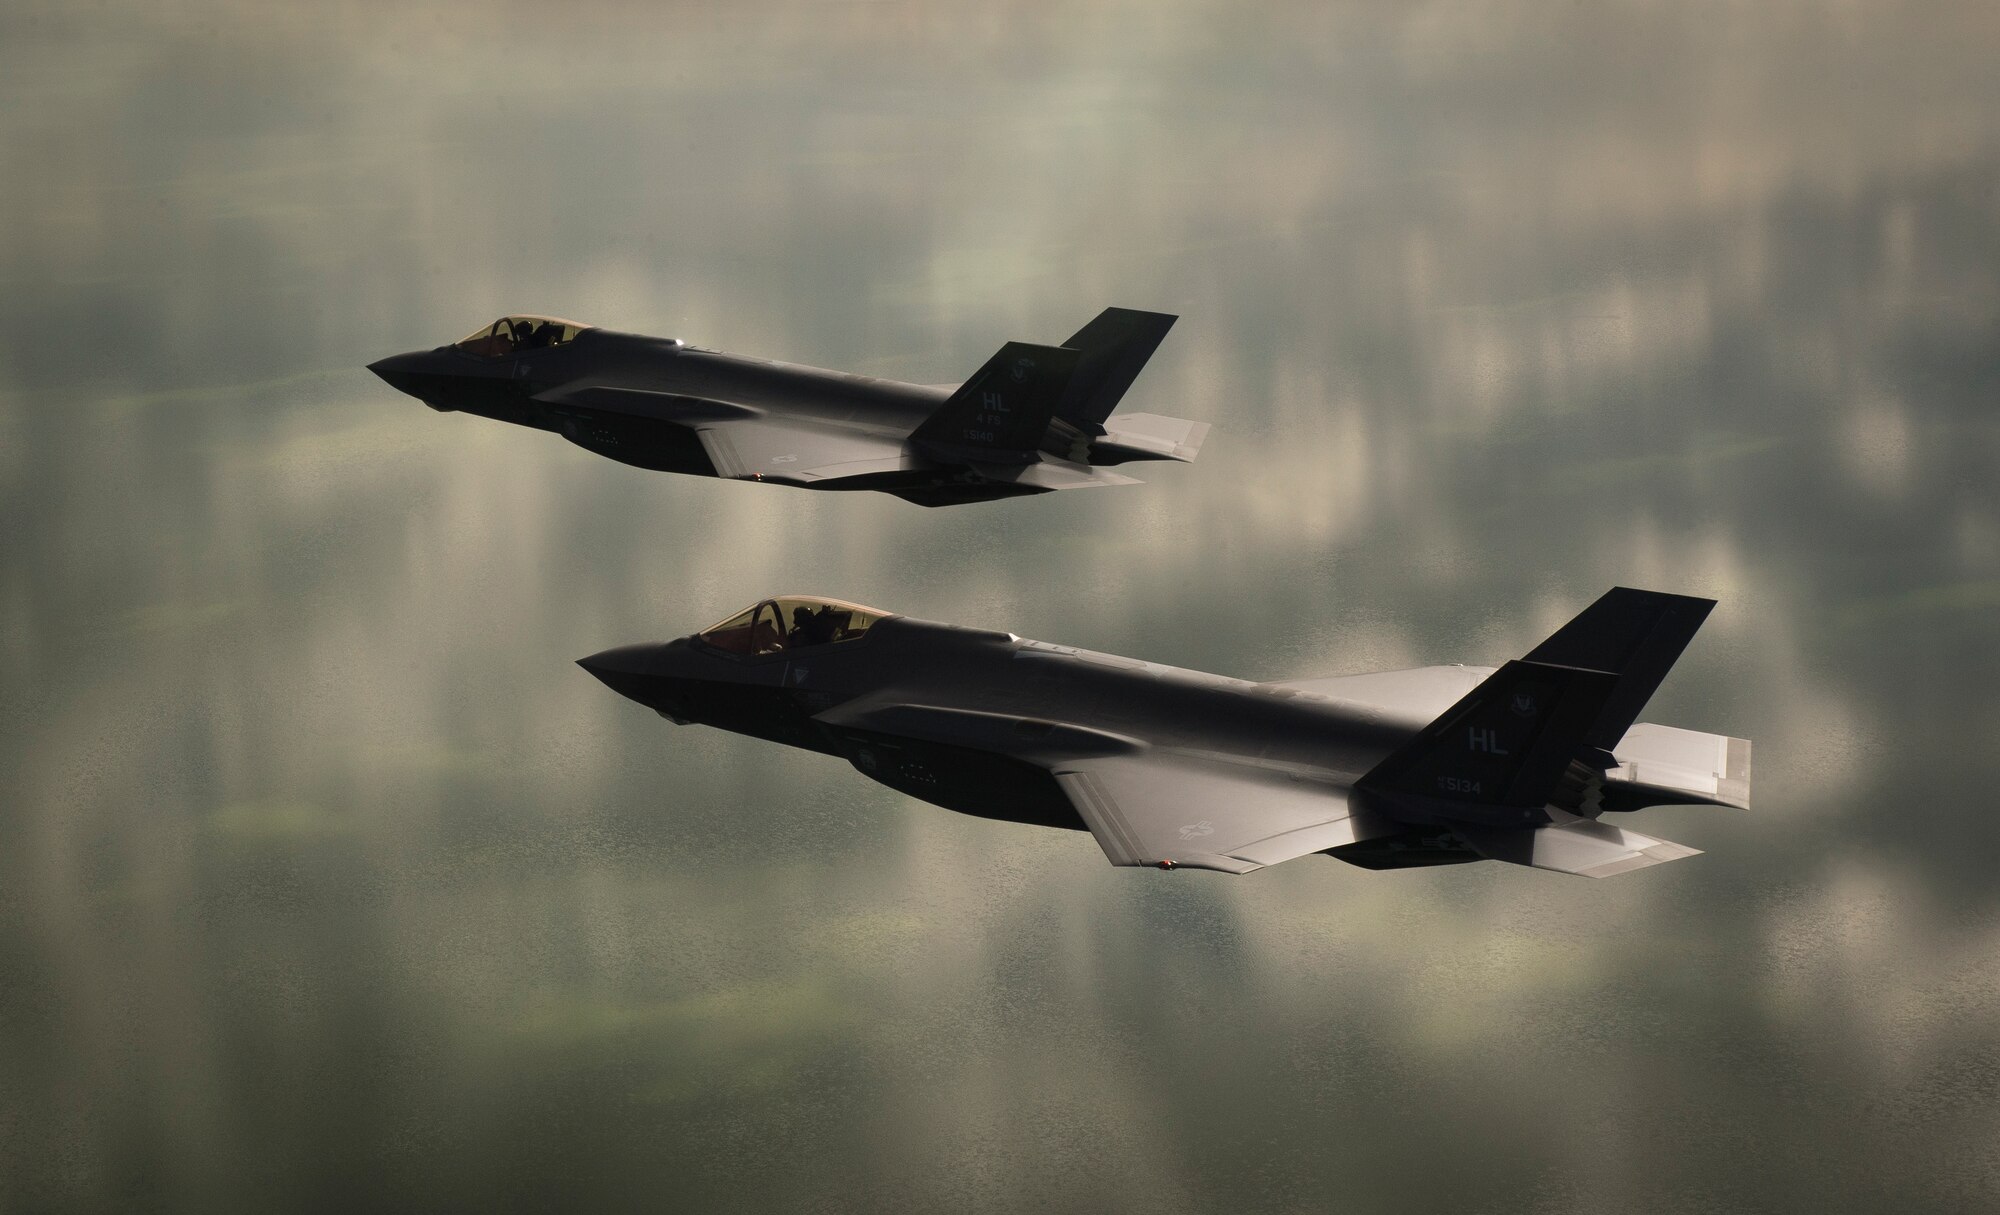 Two U.S. Air Force F-35A Lightning IIs, assigned to the 4th Fighter Squadron from Hill Air Force Base, Utah, conduct flight training operations over the Utah Test and Training Range on Feb 14, 2018. The F-35A is a single-seat, single engine, fifth generation, multirole fighter that’s able to perform ground attack, reconnaissance and air defense missions with stealth capability. (U.S. Air Force photo by Staff Sgt. Andrew Lee)